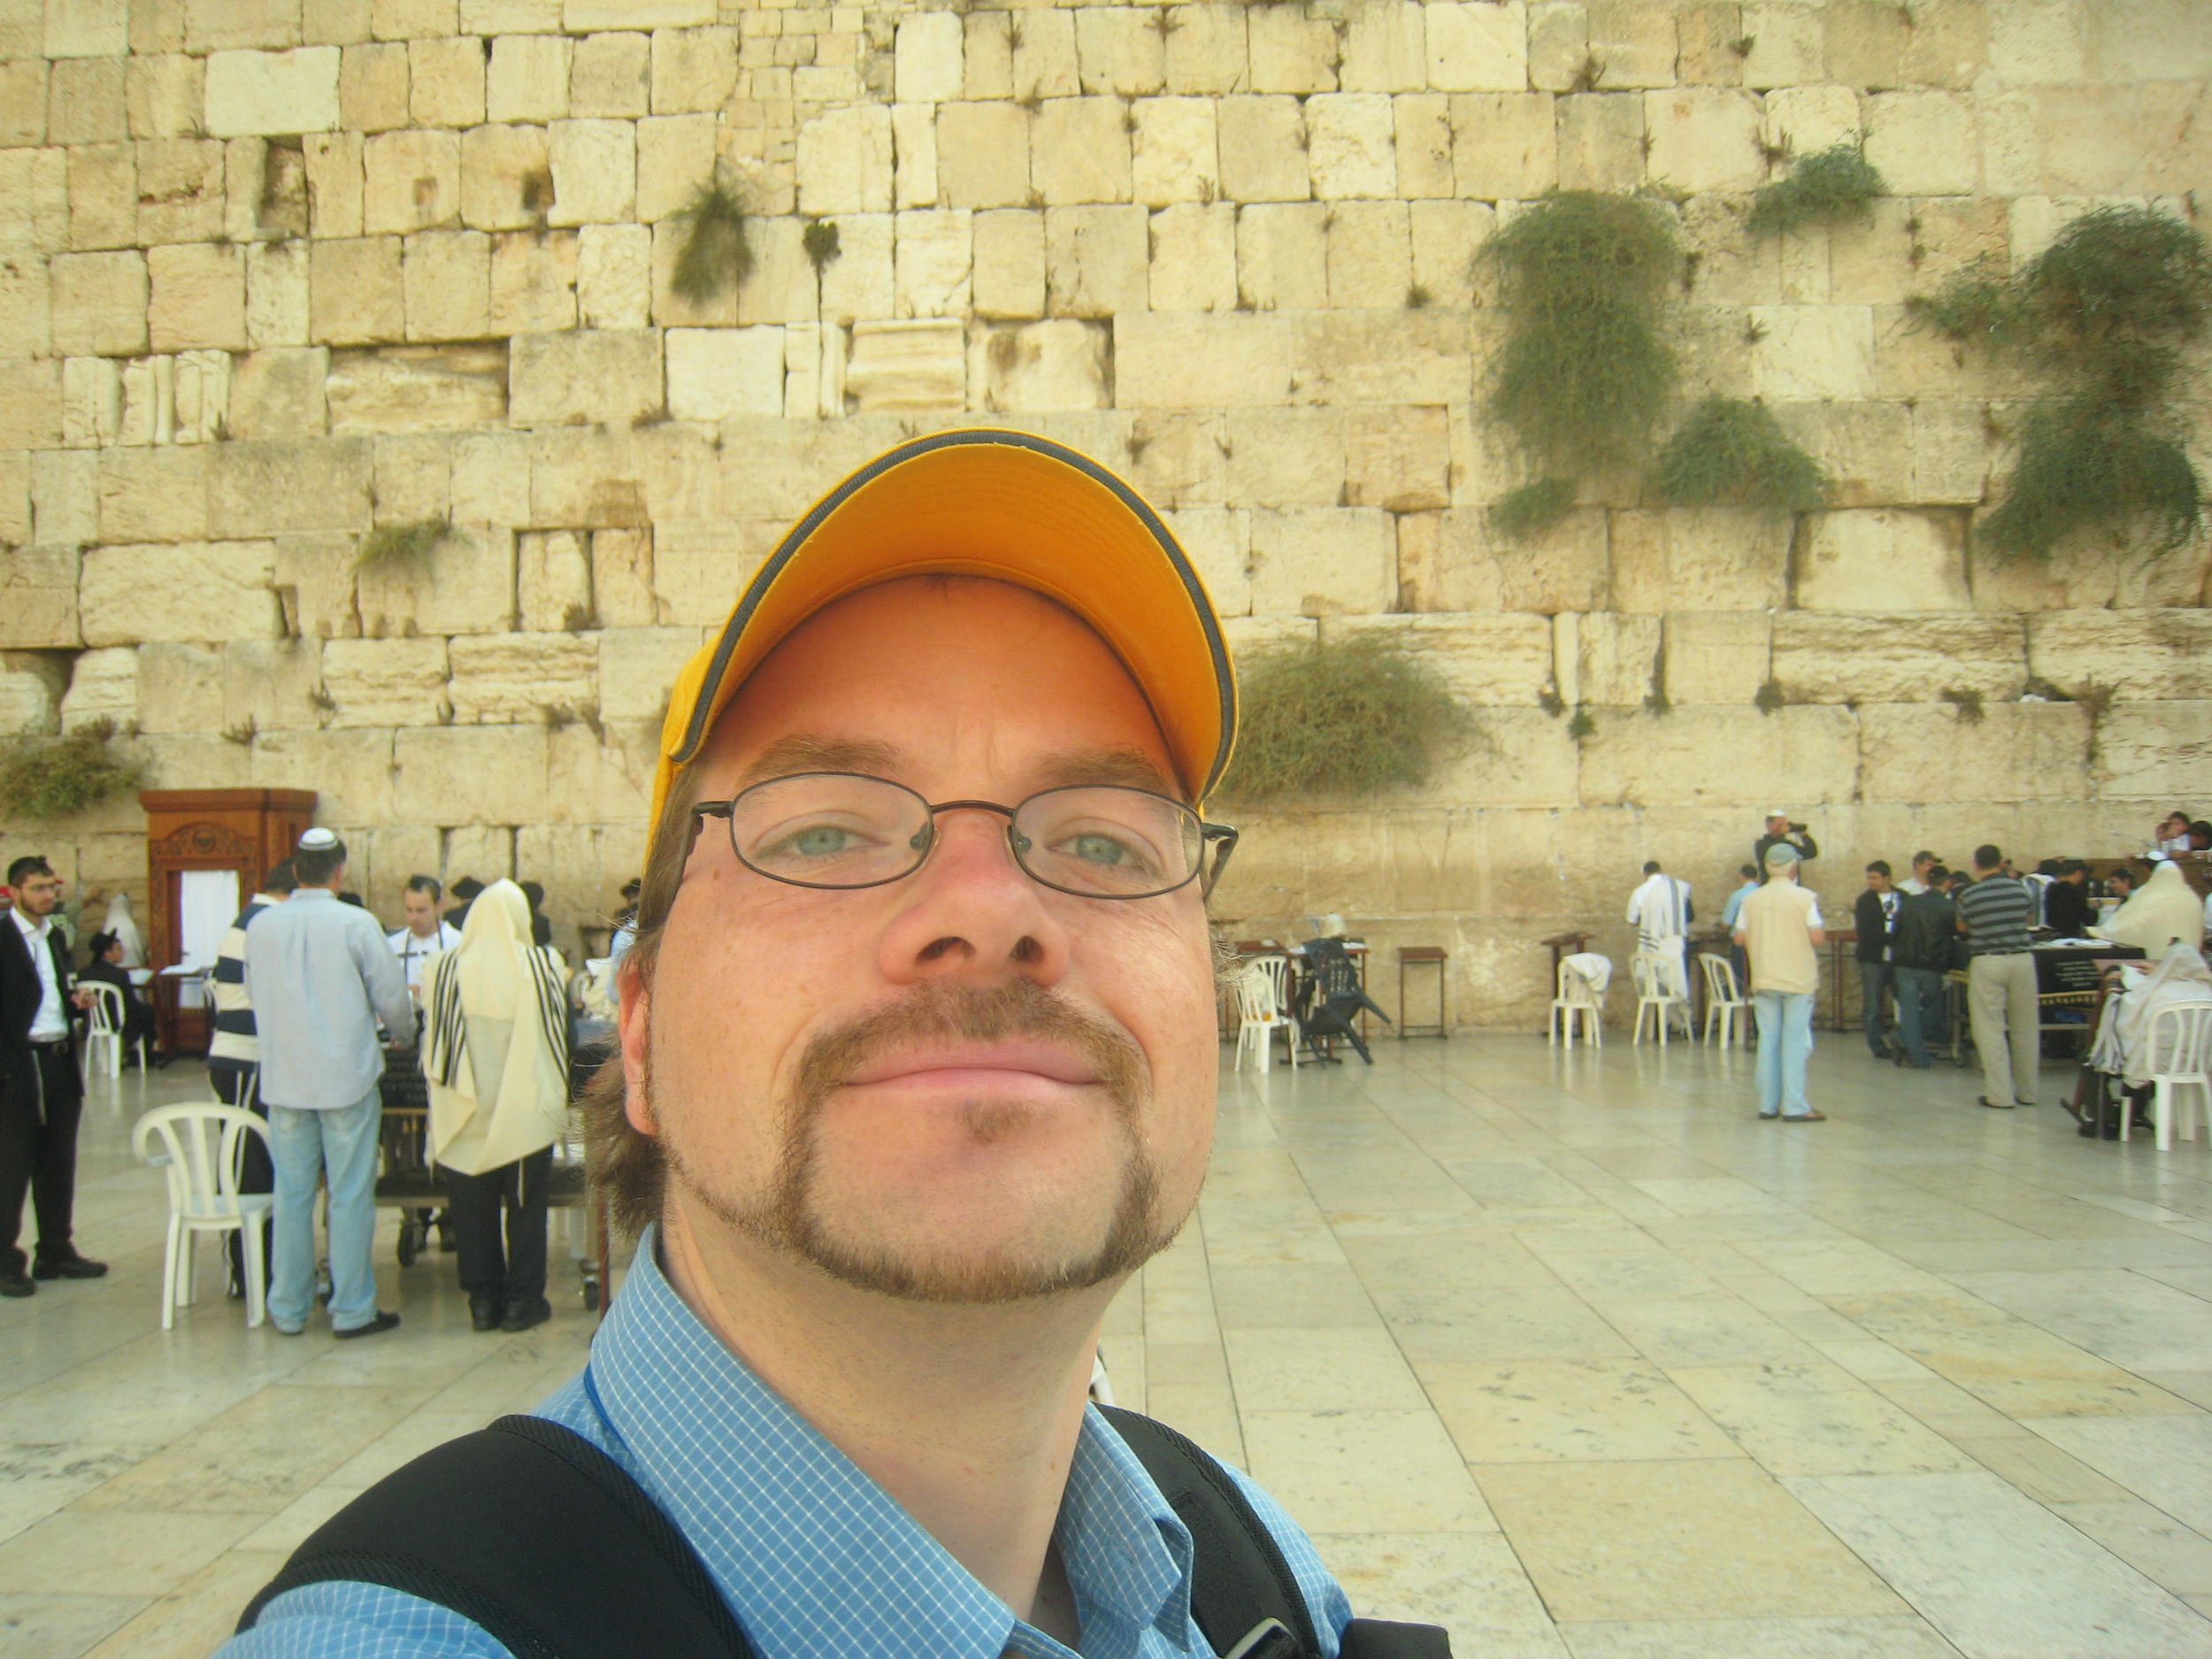 At the Western Wall in Jerusalem, 2009